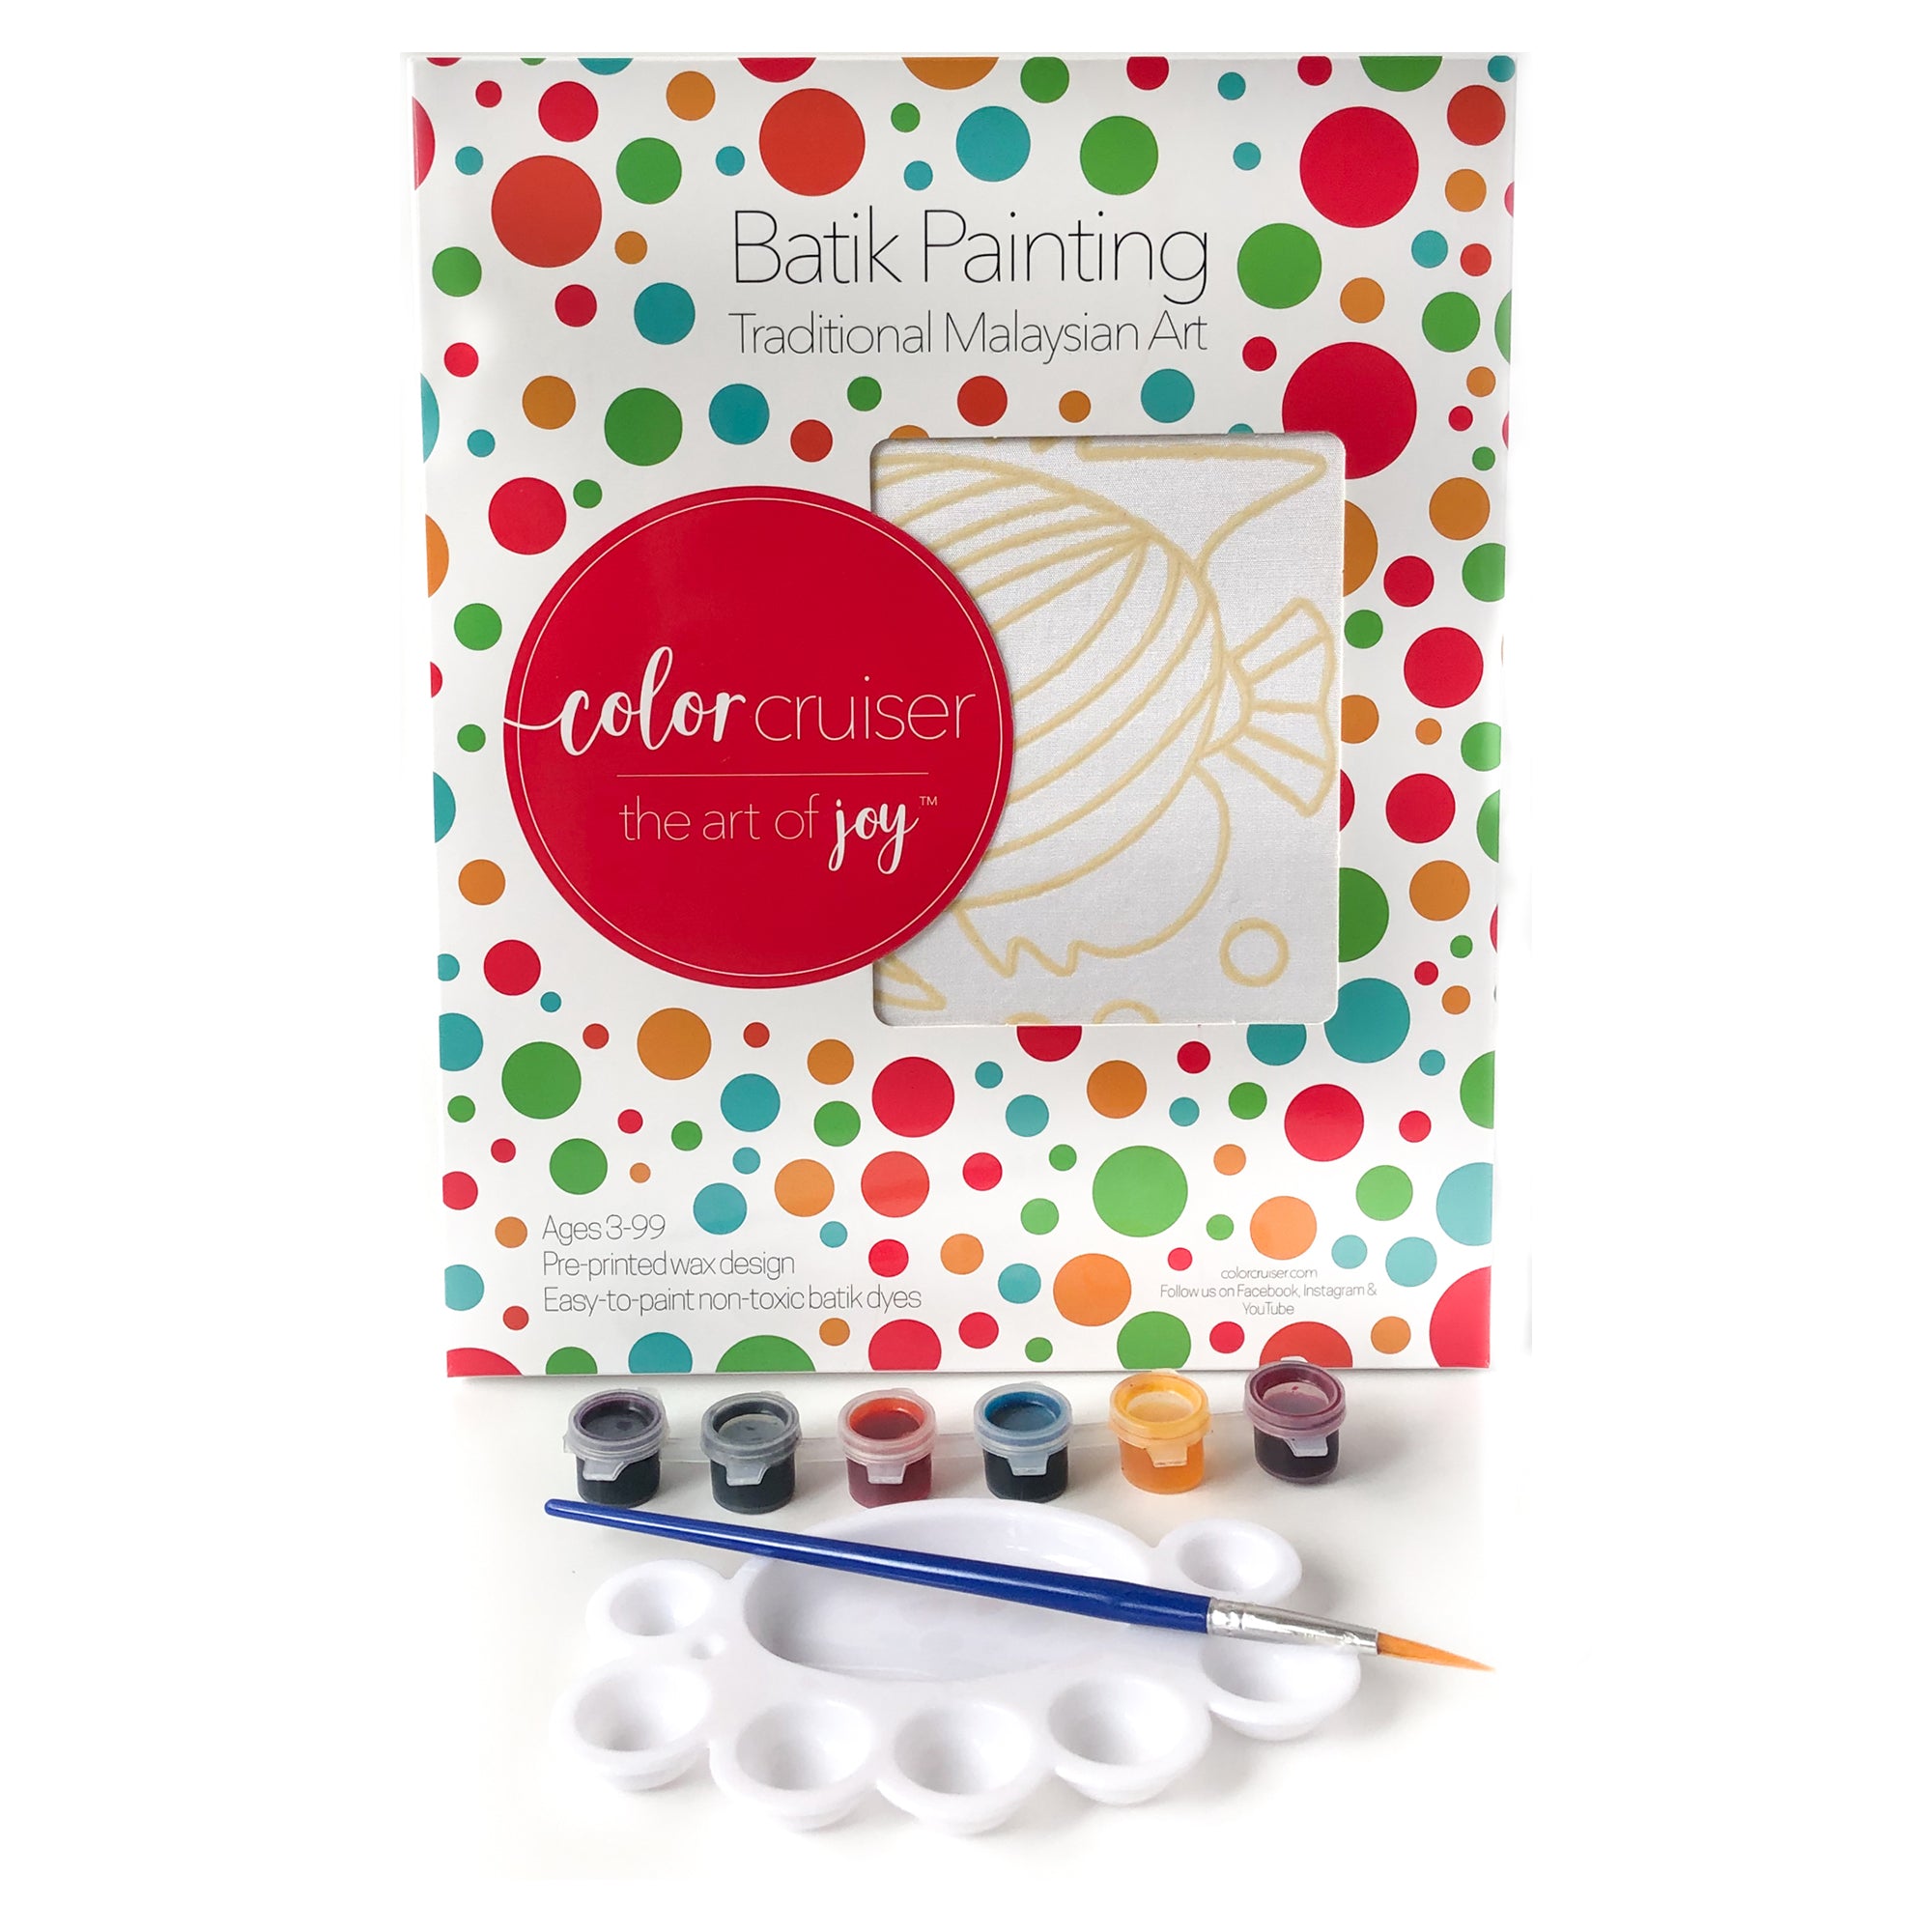 Paint by numbers - Creative Gift Under $20